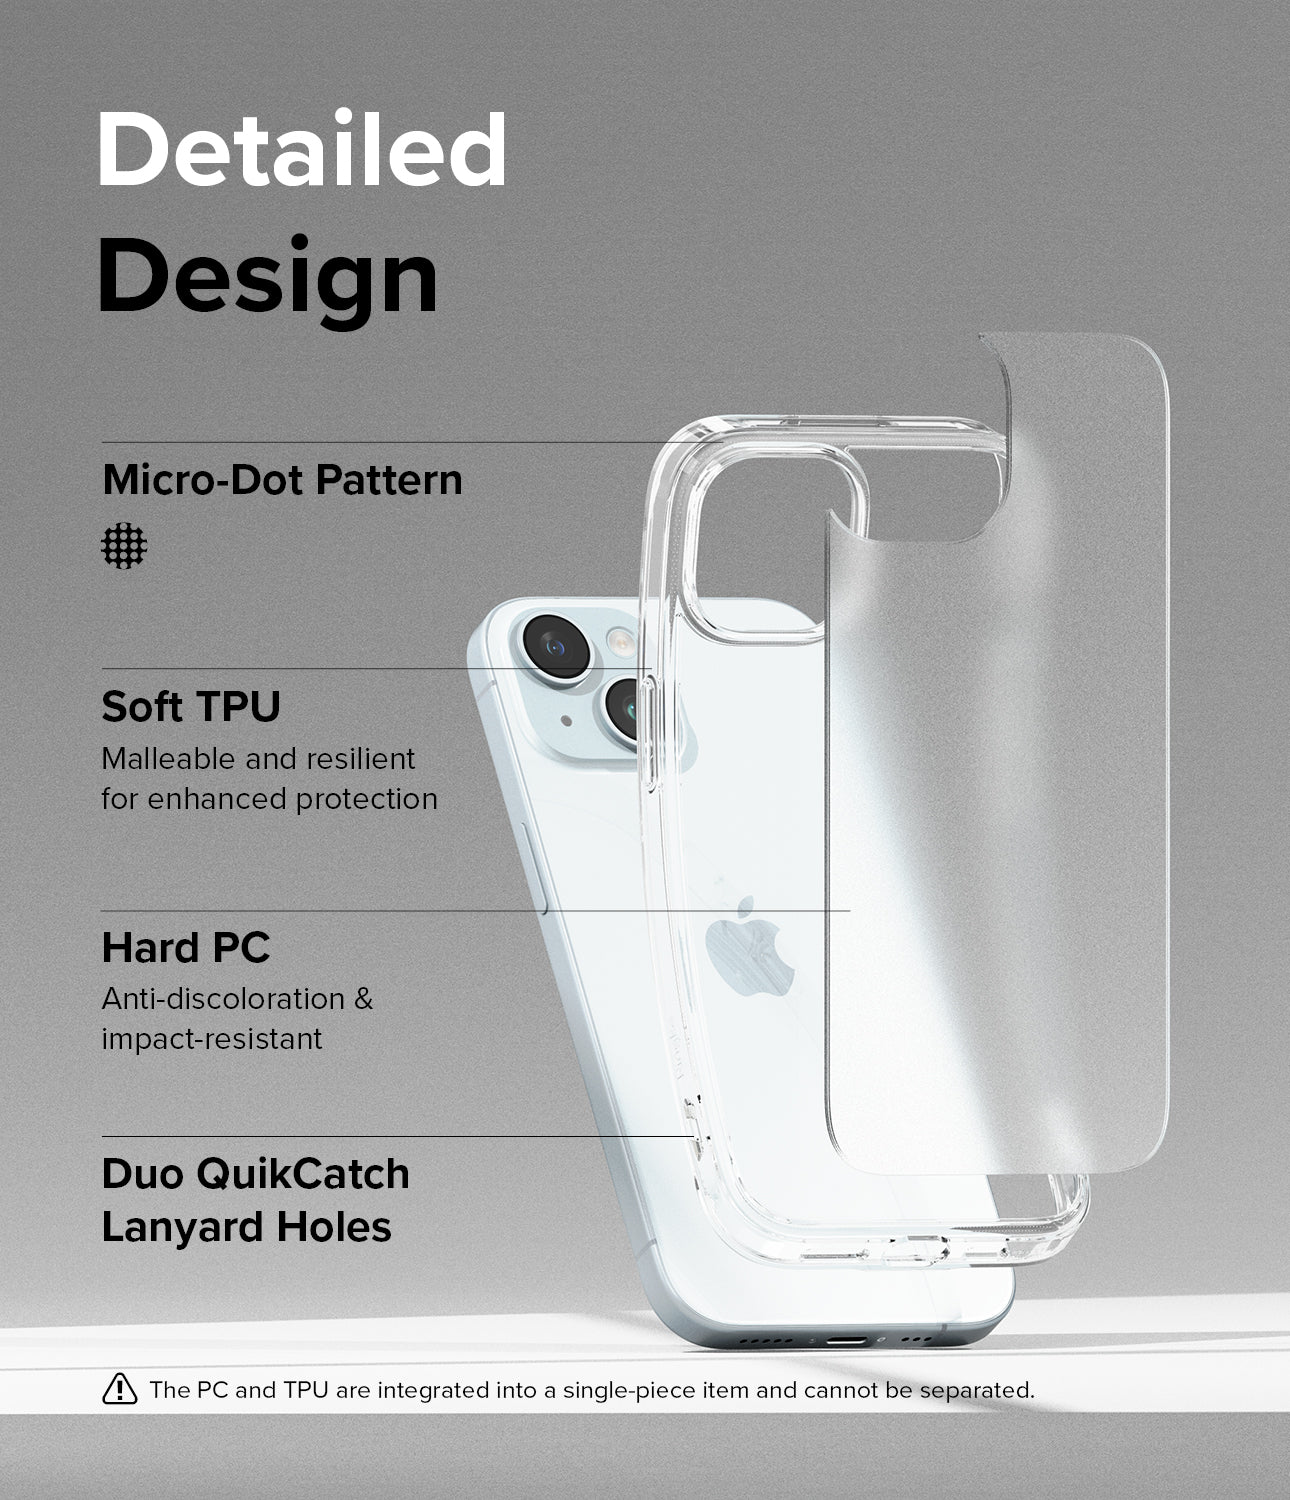 iPhone 15 Case | Fusion - Matte Clear - Detailed Design. Micro-Dot Pattern. Malleable and resilient for enhanced protection. Anti-discoloration and impact-resistant with Hard PC. Duo-QuikCatch Lanyard Holes.